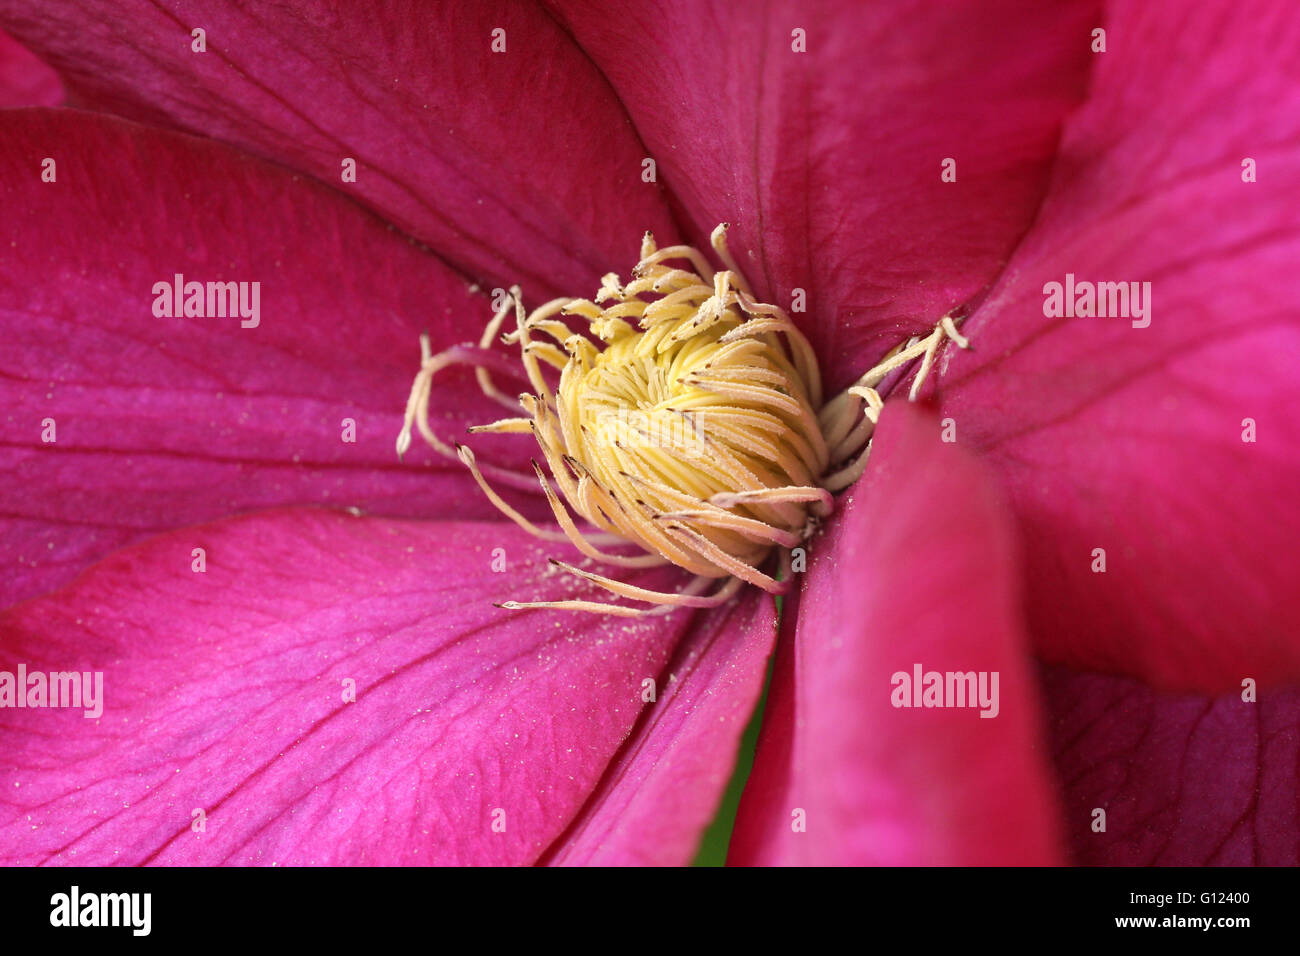 Pretty pink and yellow centered flower in a garden Stock Photo